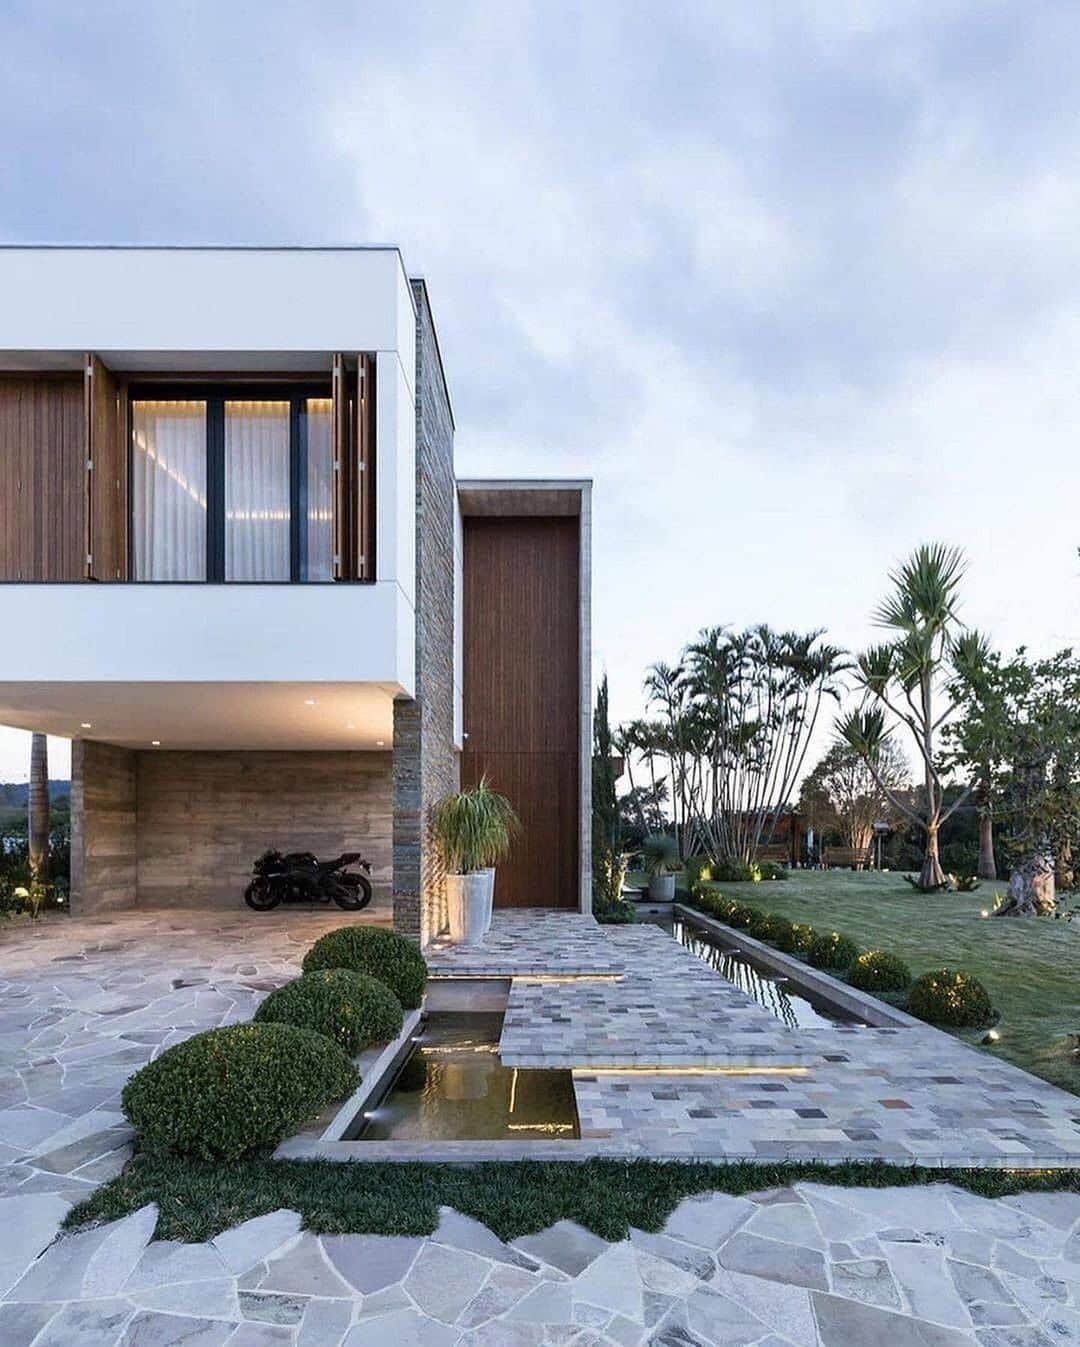 Architecture - Housesさんのインスタグラム写真 - (Architecture - HousesInstagram)「⁣ 𝐌𝐨𝐝𝐞𝐫𝐧𝐢𝐭𝐲, 𝐟𝐮𝐧𝐜𝐭𝐢𝐨𝐧𝐚𝐥𝐢𝐭𝐲 𝐚𝐧𝐝 𝐚 𝐬𝐭𝐫𝐨𝐧𝐠 𝐩𝐞𝐫𝐬𝐨𝐧𝐚𝐥𝐢𝐭𝐲.⁣ We couldn’t find a better project to end this weird and awful year. Thanks for being with us one year more #archilovers💙. Happy #NewYearsEve and 2021 will bring us more projects and more architecture. ⁣ _____⁣⁣⁣⁣⁣⁣⁣⁣⁣⁣⁣⁣⁣⁣⁣⁣⁣⁣⁣⁣⁣⁣⁣⁣⁣⁣⁣⁣⁣⁣⁣⁣⁣⁣⁣ 📐 @studiobloco  #archidesignhome⁣ _____⁣⁣⁣⁣⁣⁣⁣⁣⁣⁣⁣⁣⁣⁣⁣⁣⁣⁣⁣⁣⁣⁣⁣⁣⁣⁣⁣⁣⁣⁣⁣⁣⁣⁣⁣ #architecture #arquitectura #arquitectura #building #instadaily #architecturelovers #picoftheday #amazingarchitecture #archvisuals #architects_review #allofarchitecture #house #architecturephotography #lovearchi #happynewyear」1月1日 0時00分 - _archidesignhome_